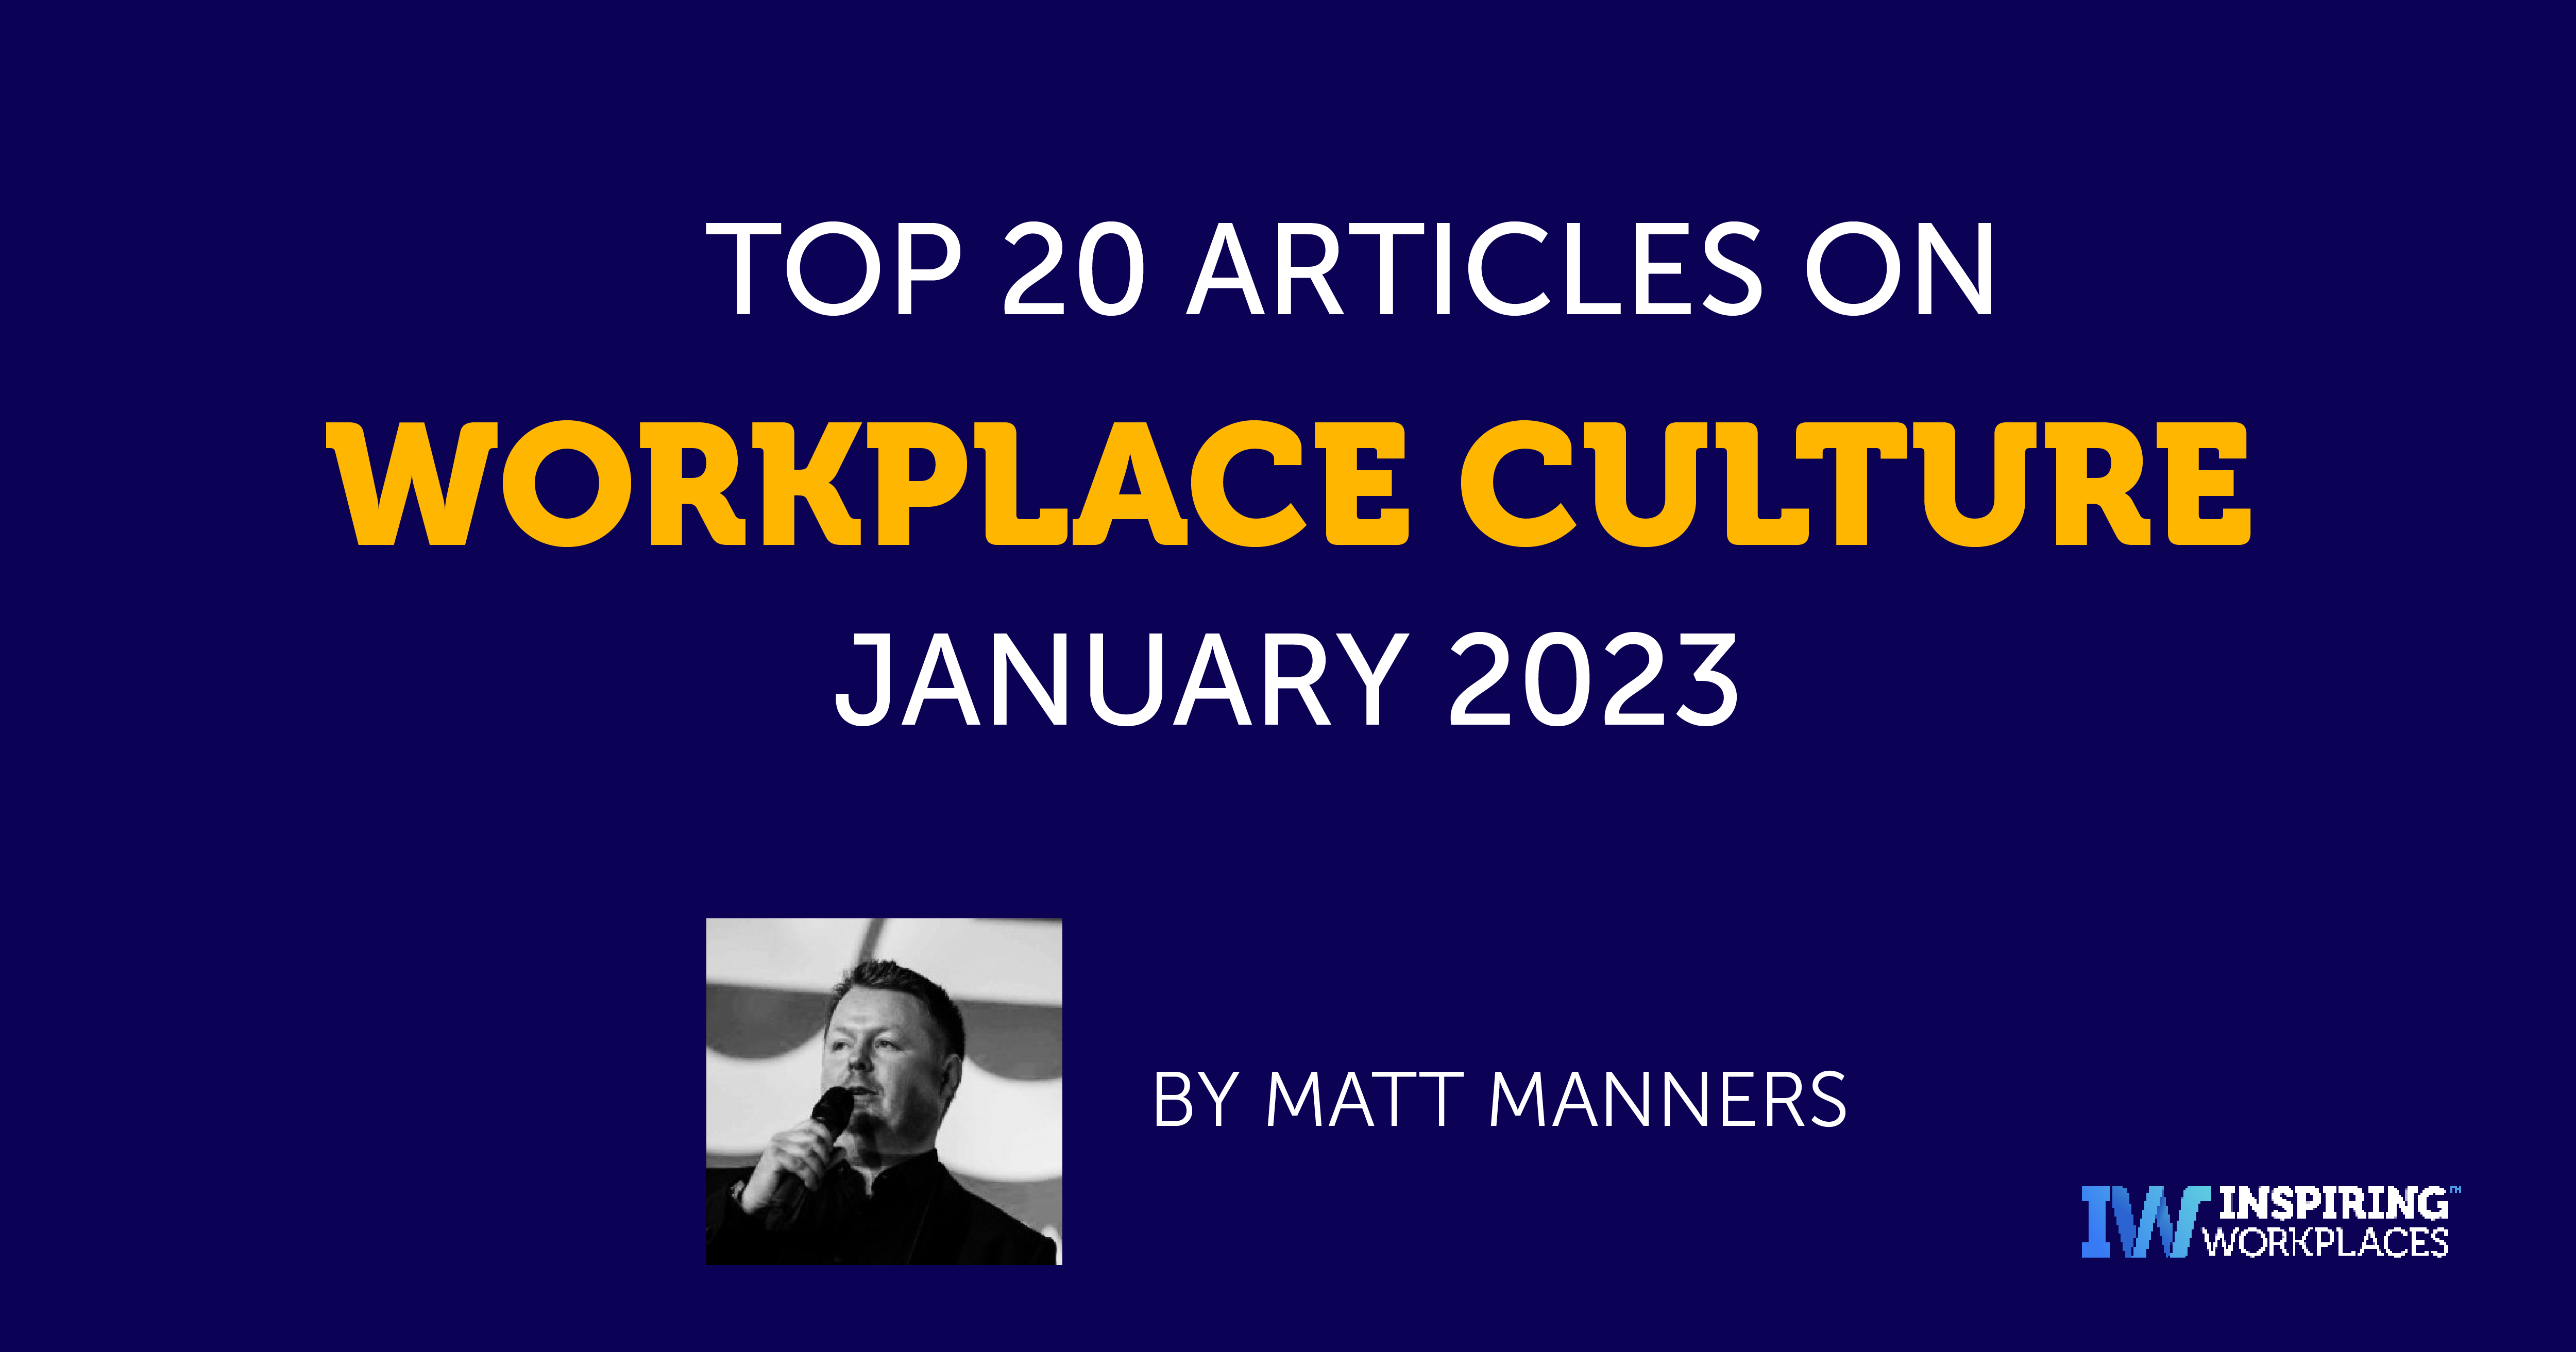 Top 20 Articles on Workplace Culture for January 2023